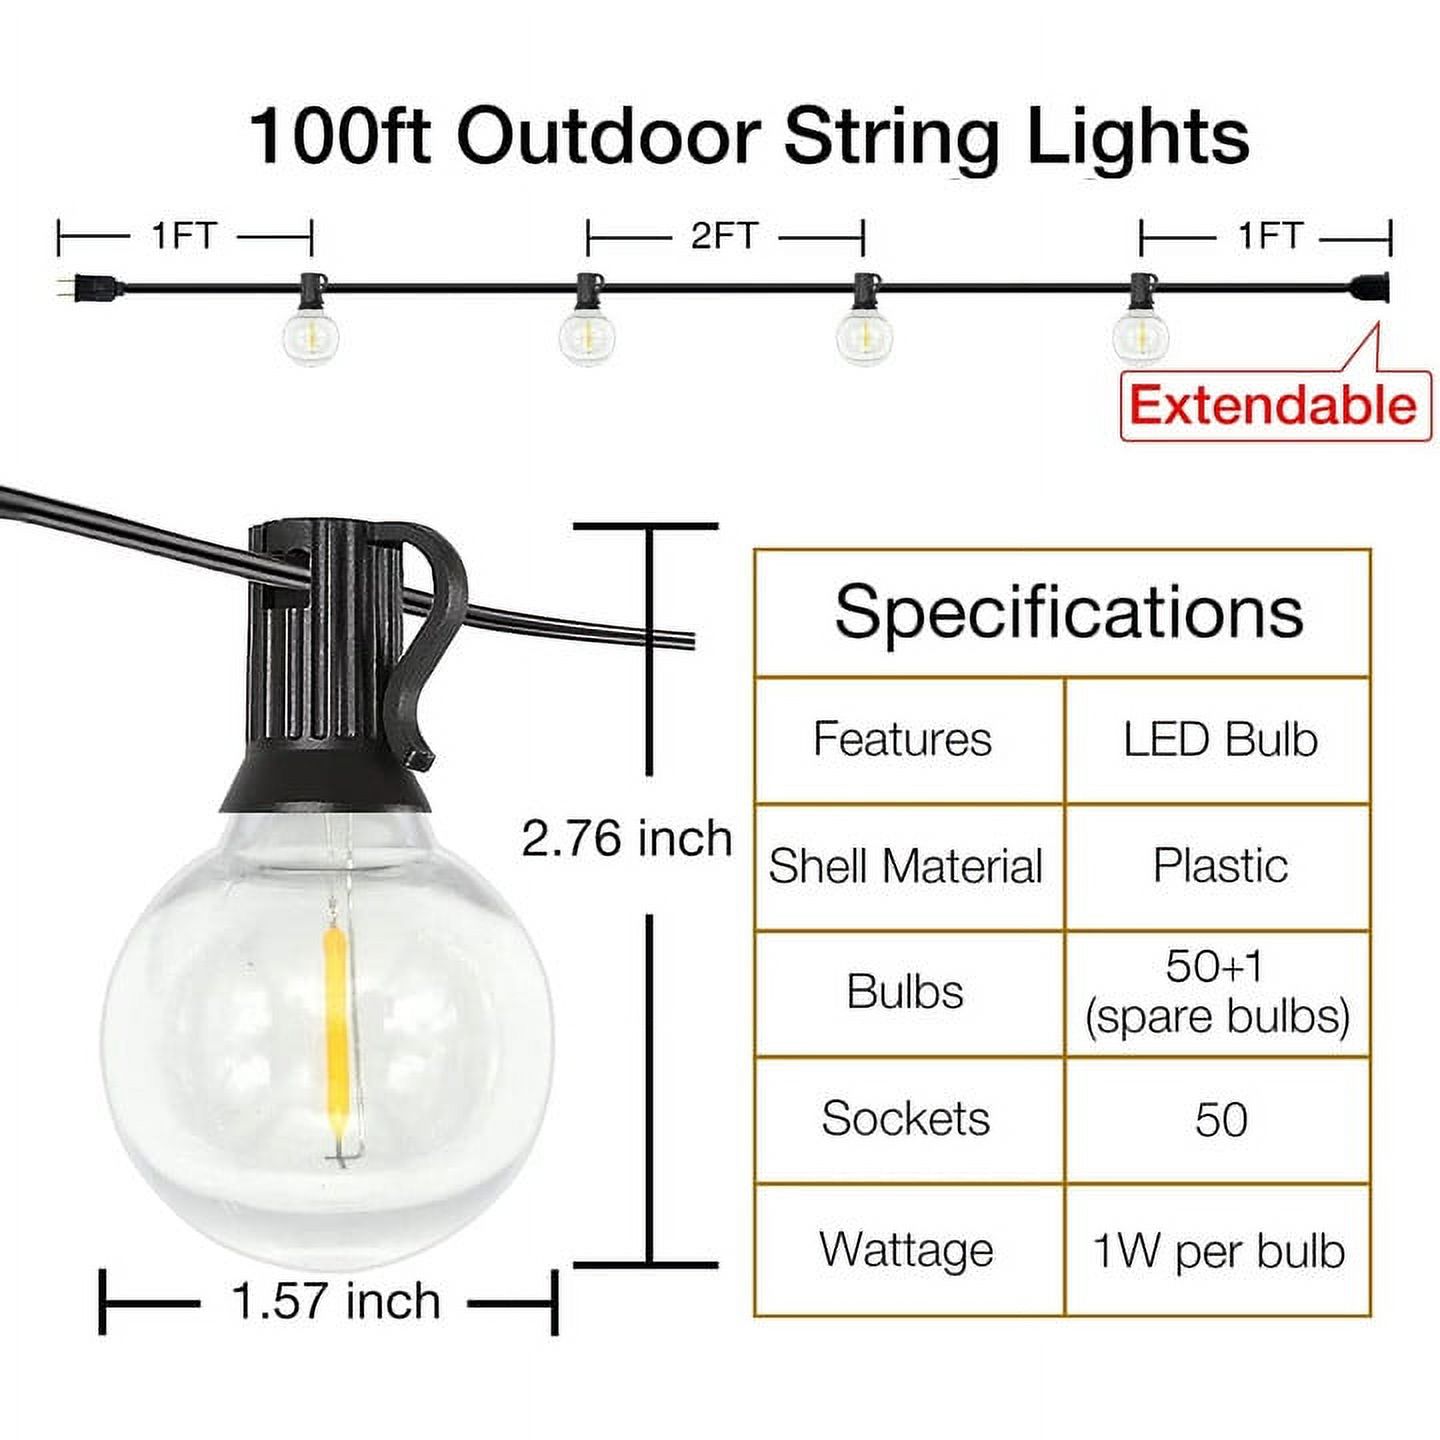 DAYBETTER Outdoor String Lights,100ft,with 50 G40 Edison Vintage Bulbs,Waterproof for Patio Garden Gazebo Bistro Cafe Backyard - image 3 of 10